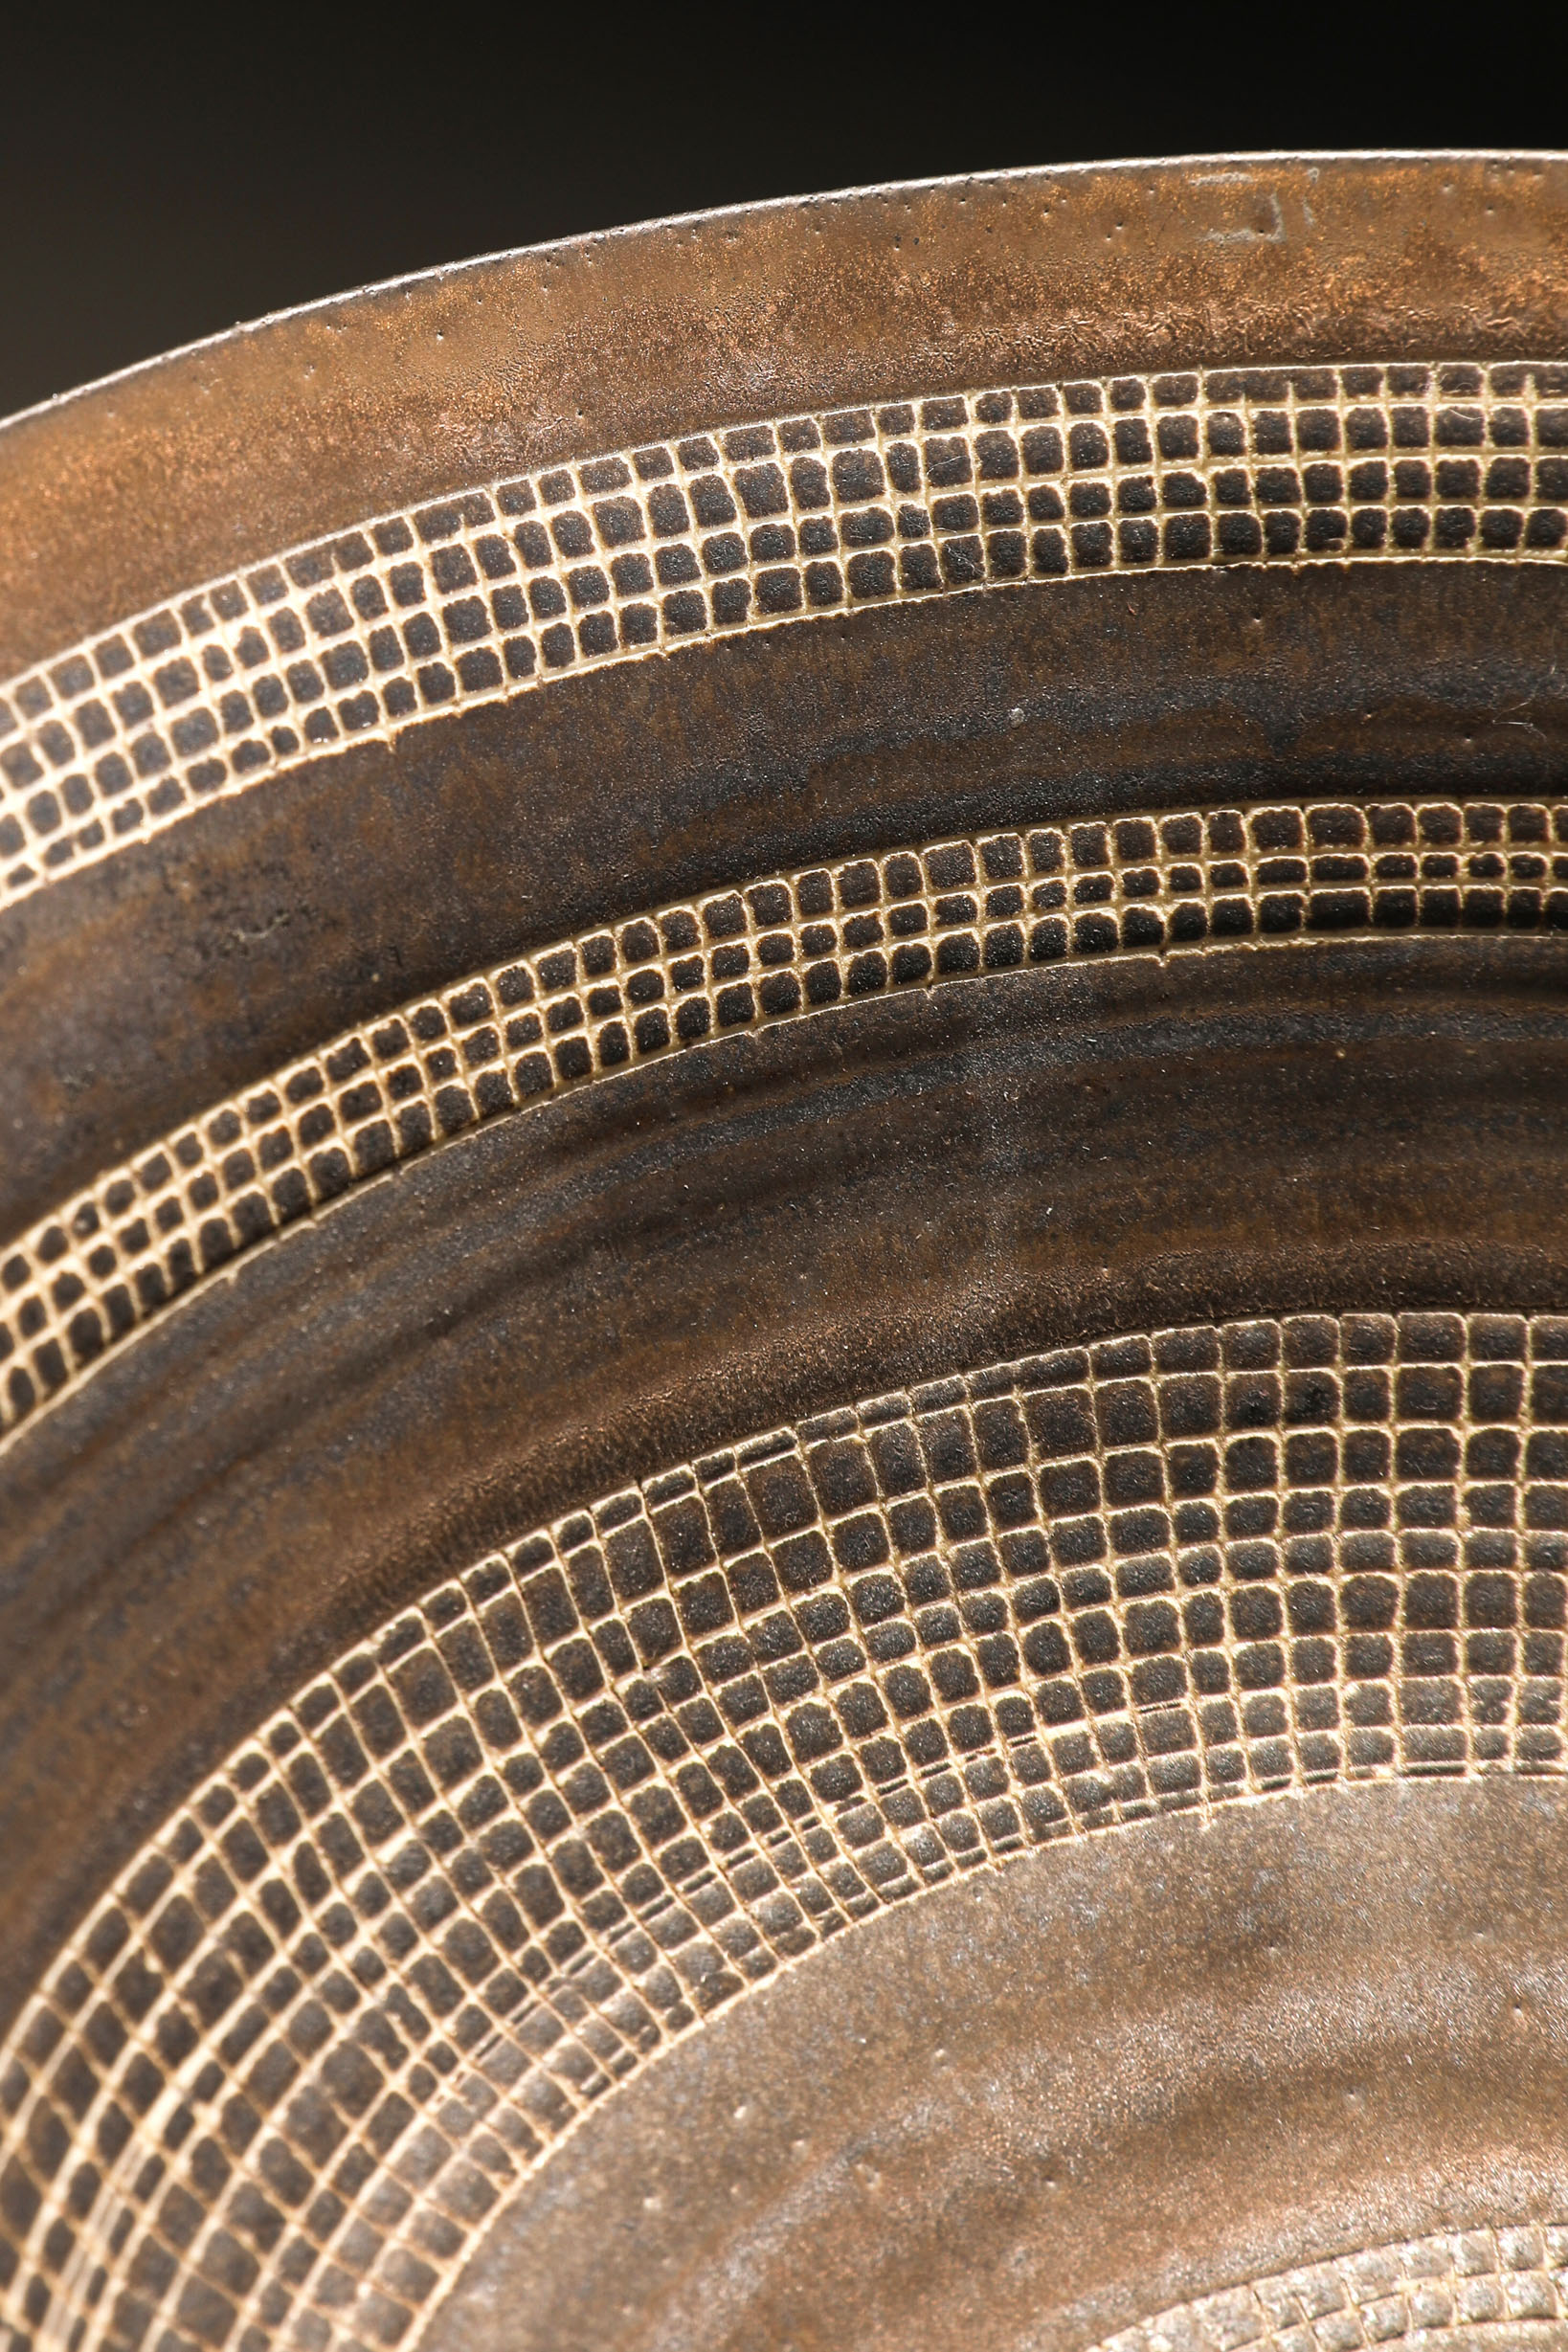 Lucie Rie*, Sgraffito Bowl, 1968-1972 - Image 3 of 8